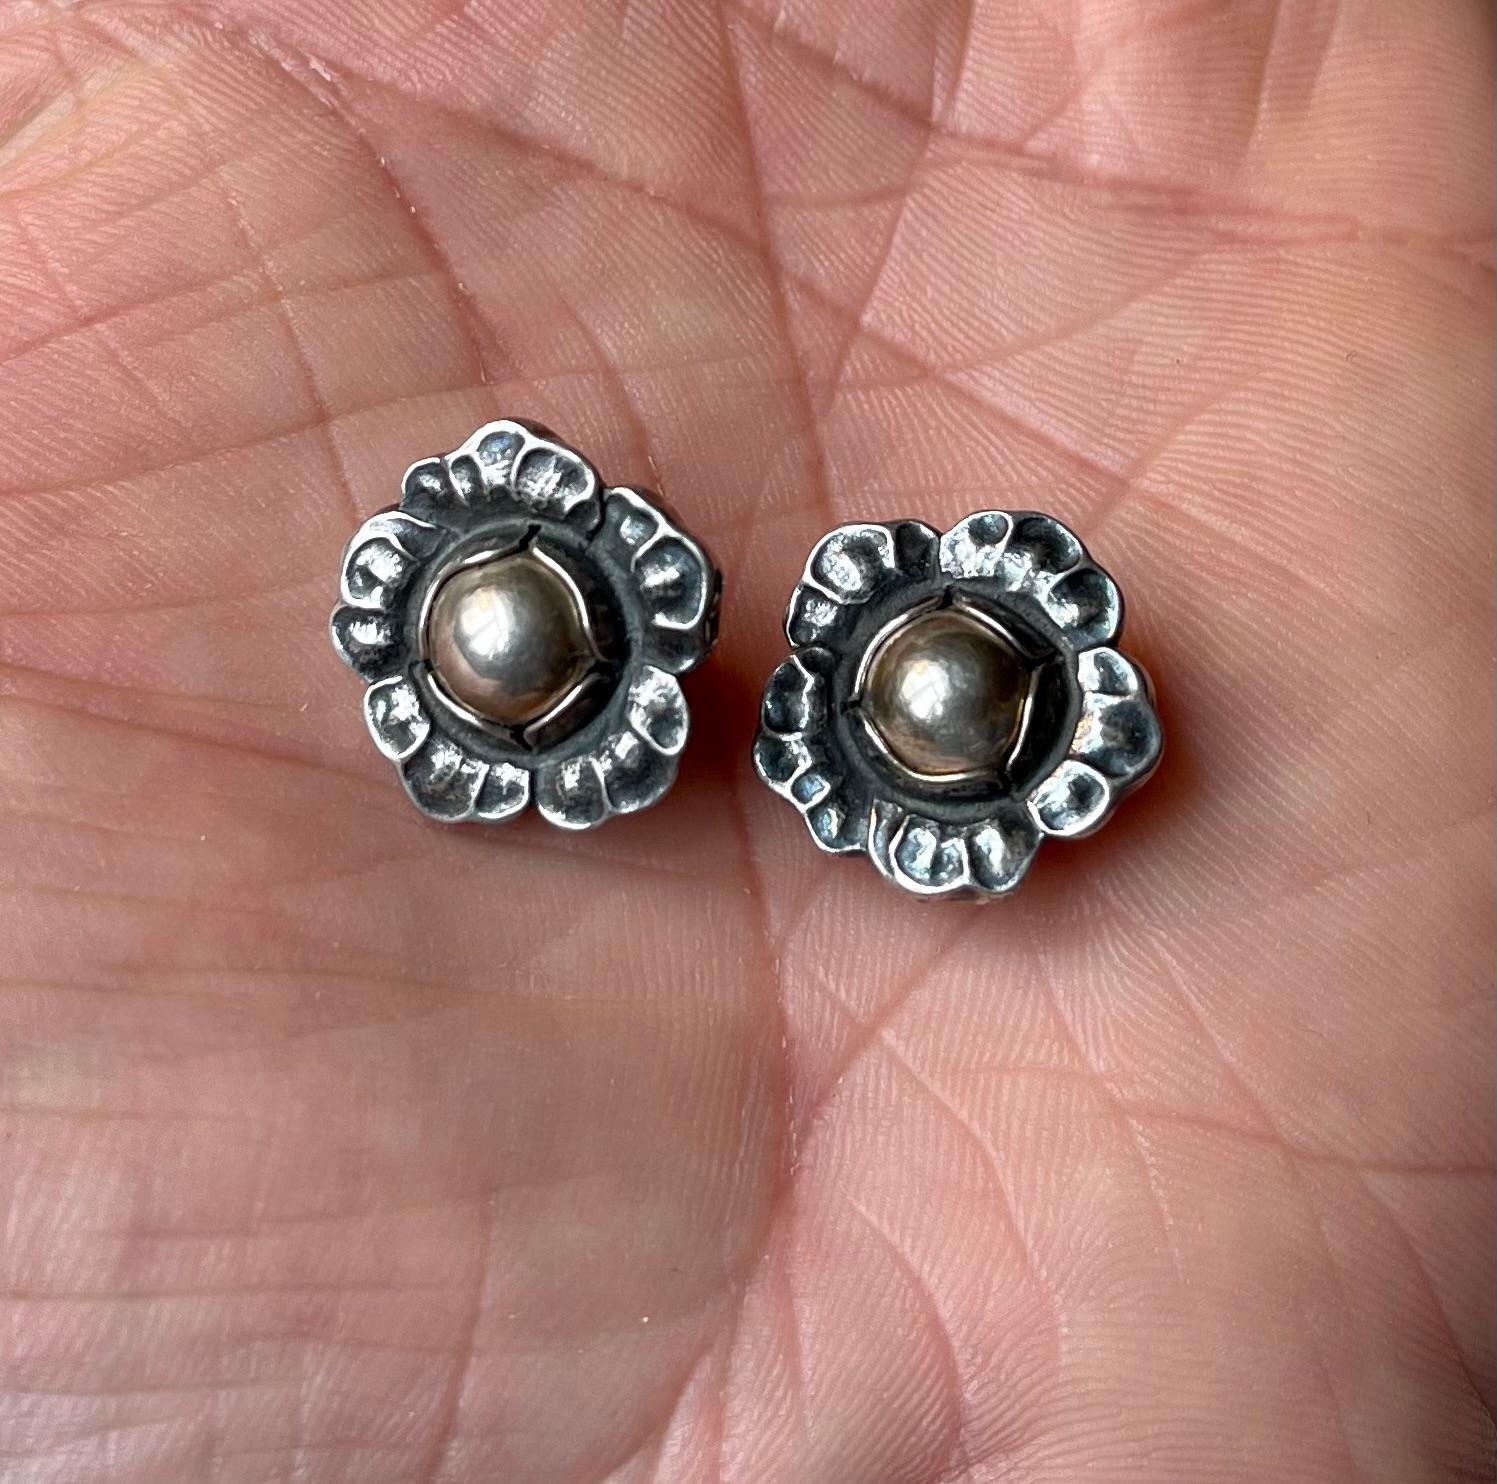 A set of 'Year' clip earrings by Georg Jensen. Based upon a design from circa 1900 these were relaunched in 2002. Floral design with silver-beads. Original box. Fully hallmarked. Measurements: 19x19x10 mm. Perfect vintage sustainable gift. The price